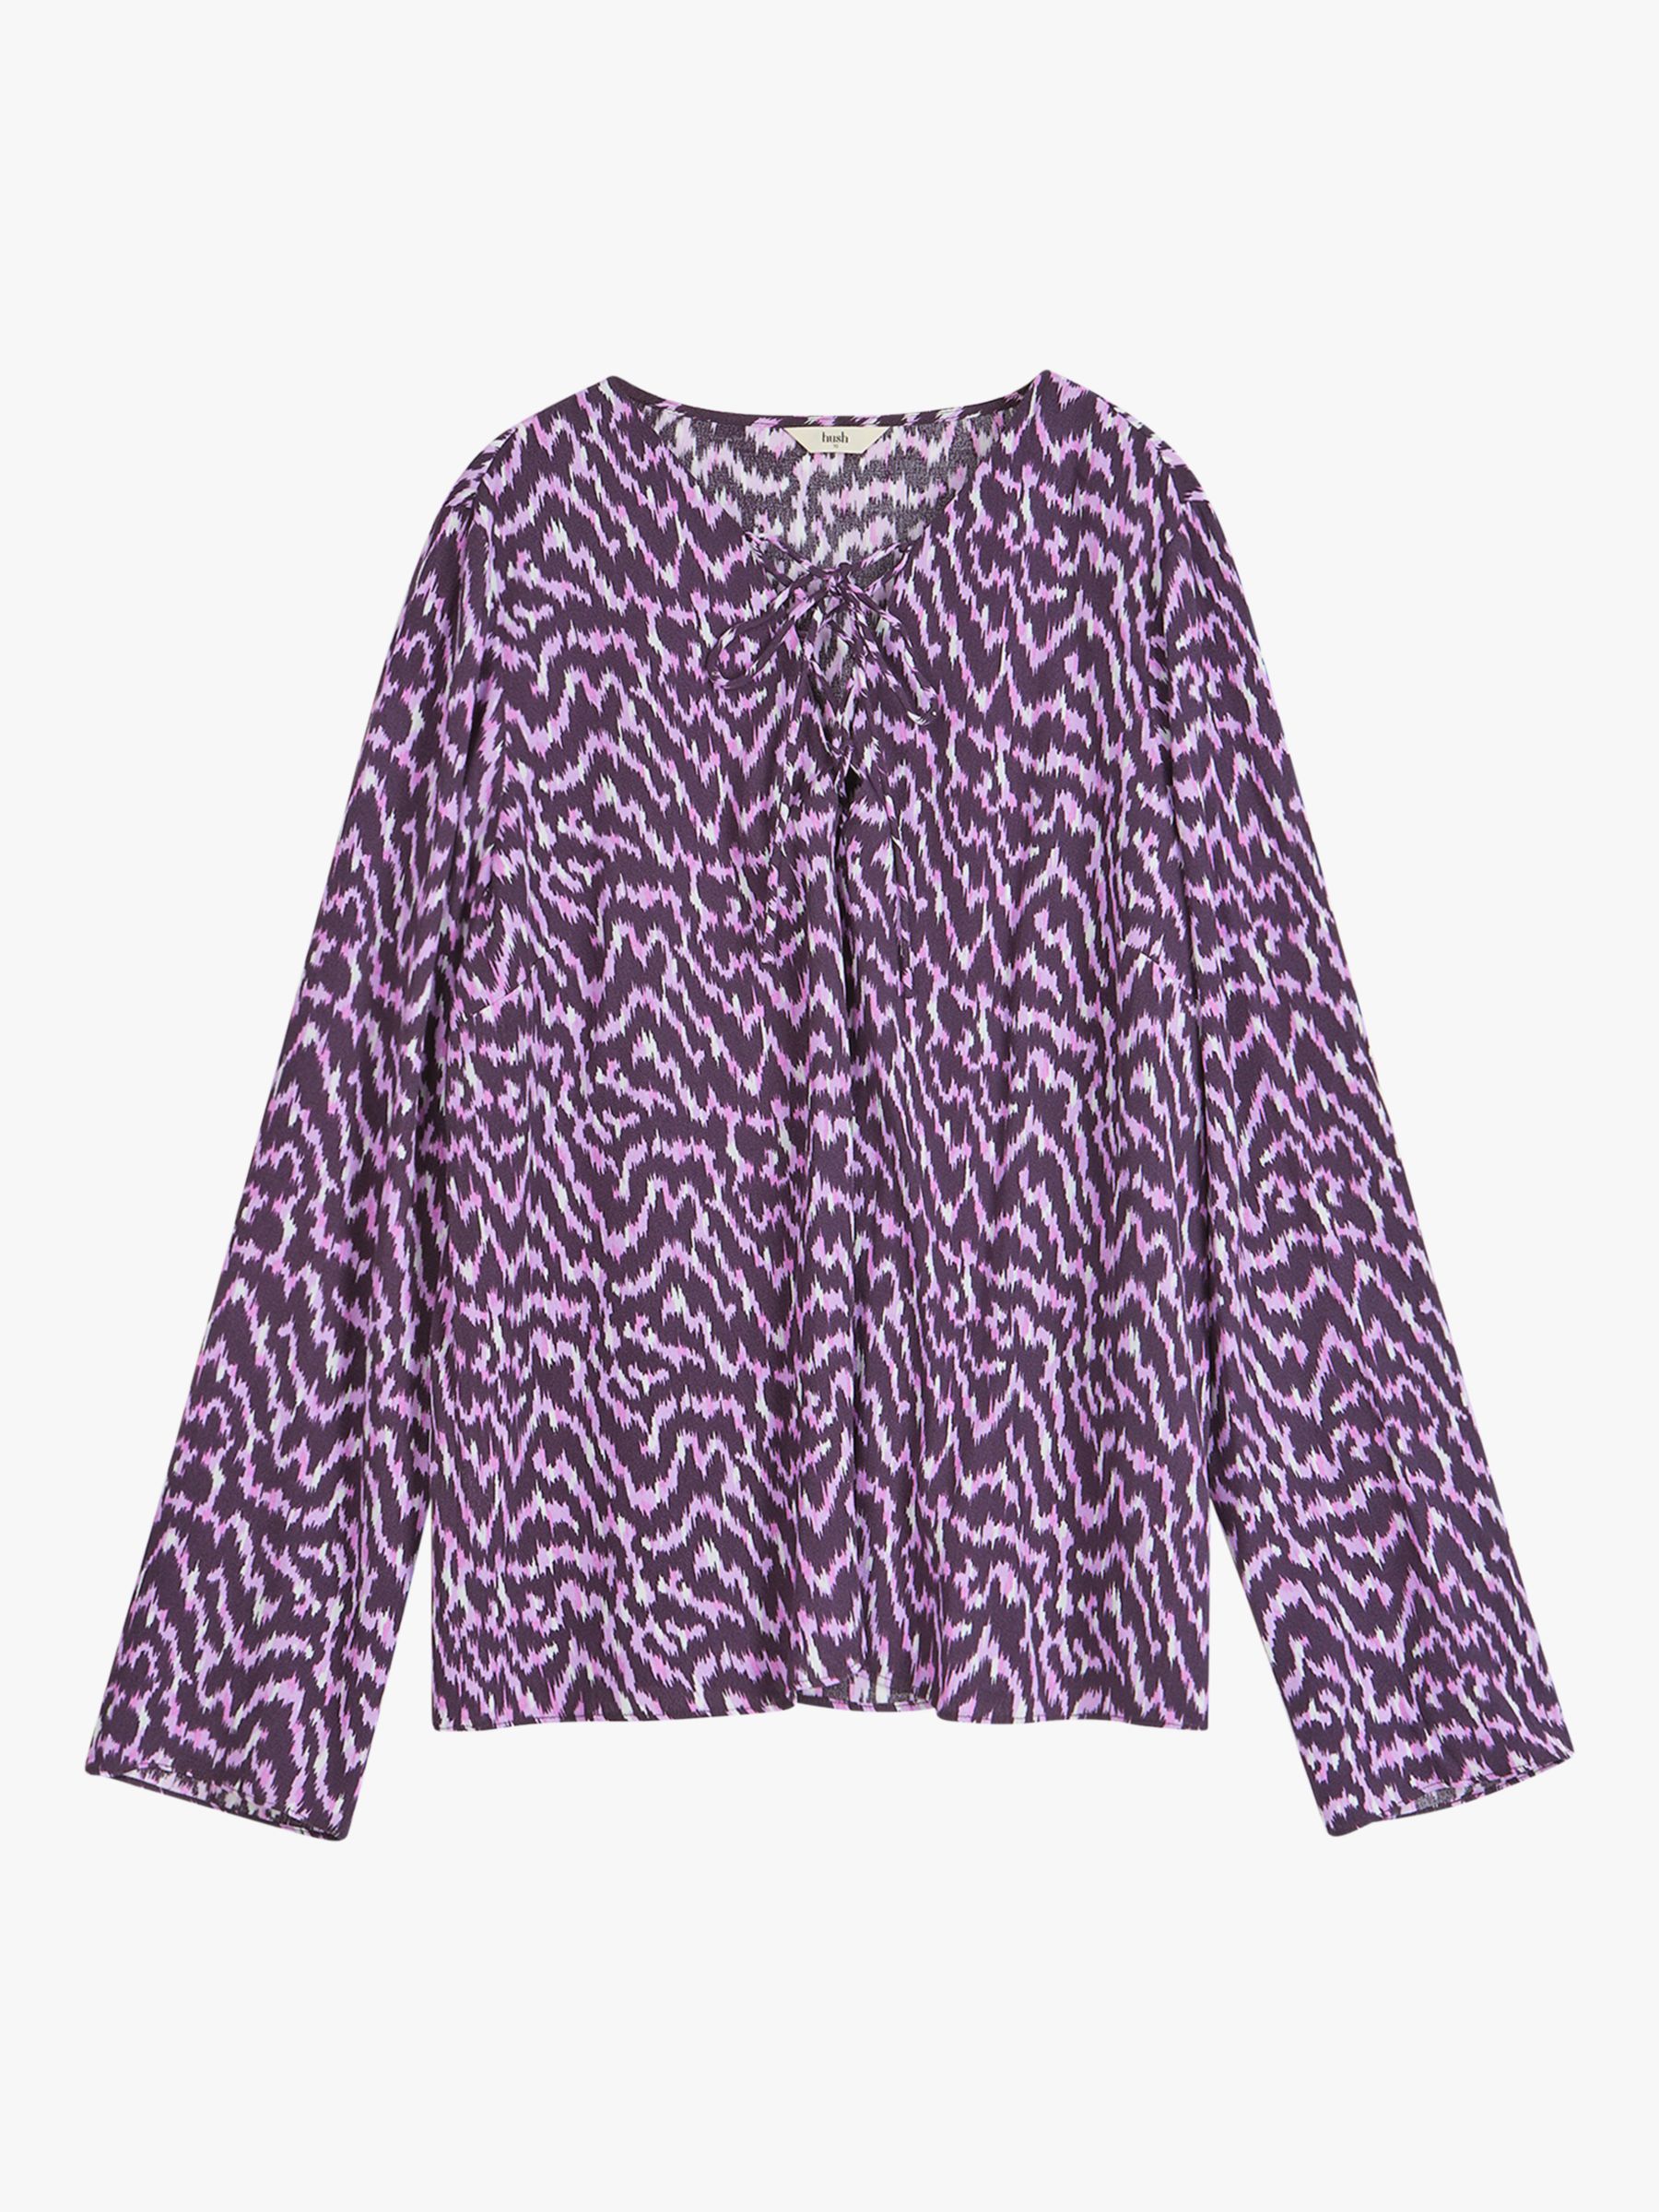 Buy HUSH Elianna Lace Up Blouse, Lilac Online at johnlewis.com